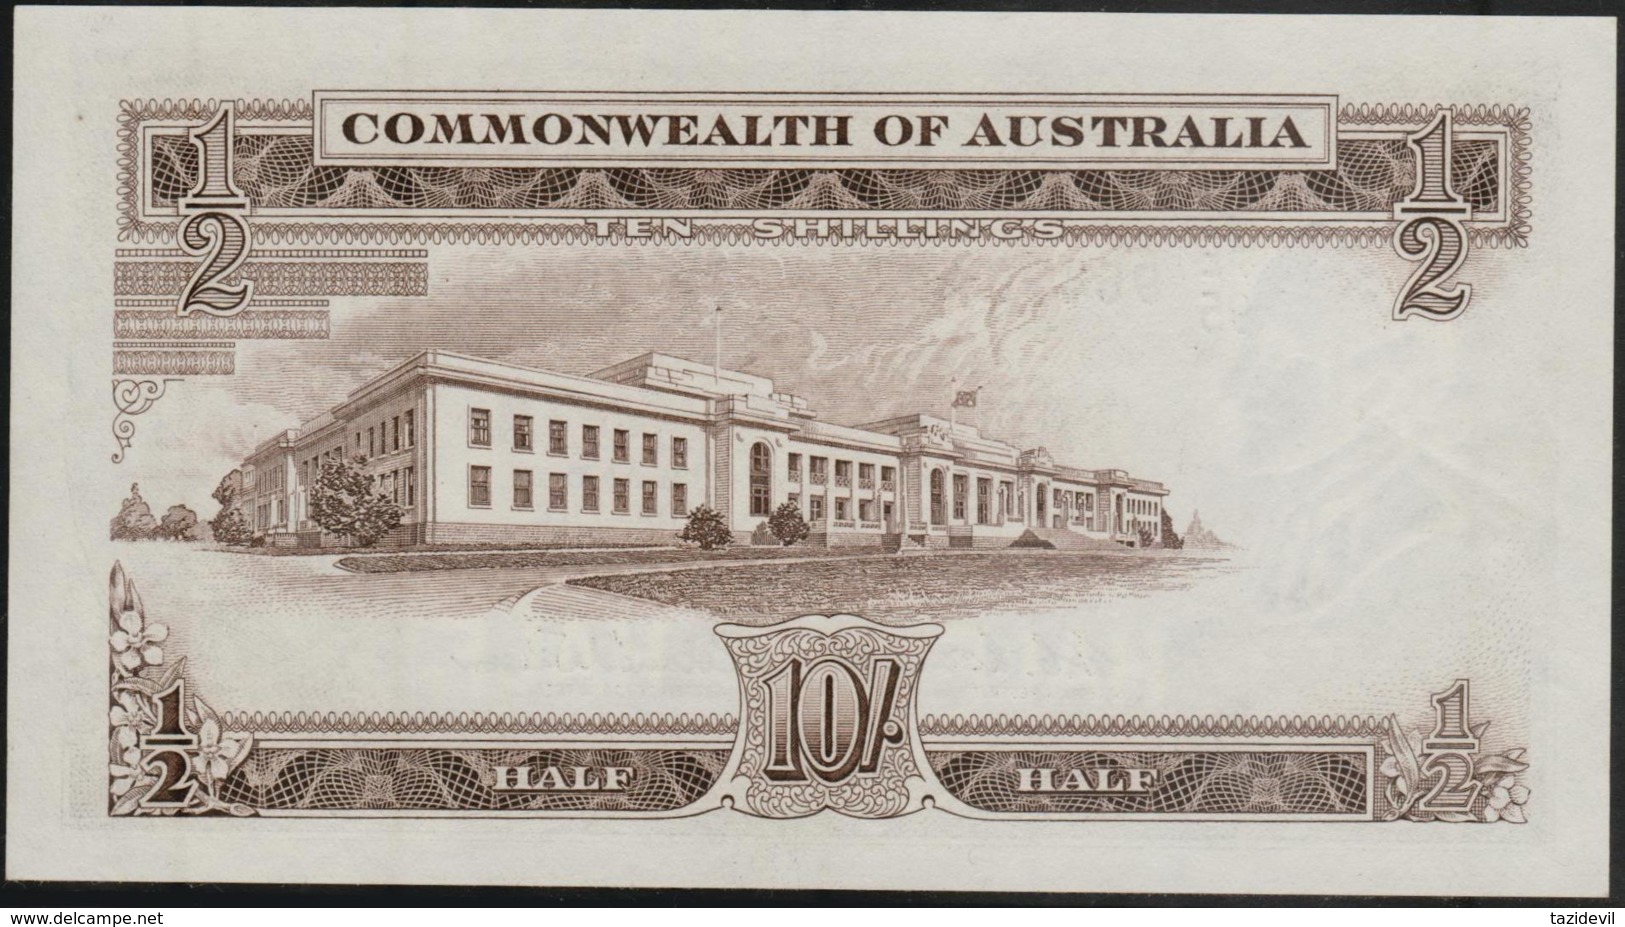 AUSTRALIA - Rare STAR NOTE - Coombs And Wilson Signatures.  Extremely Fine To Uncirculated - 1960-65 Reserve Bank Of Australia